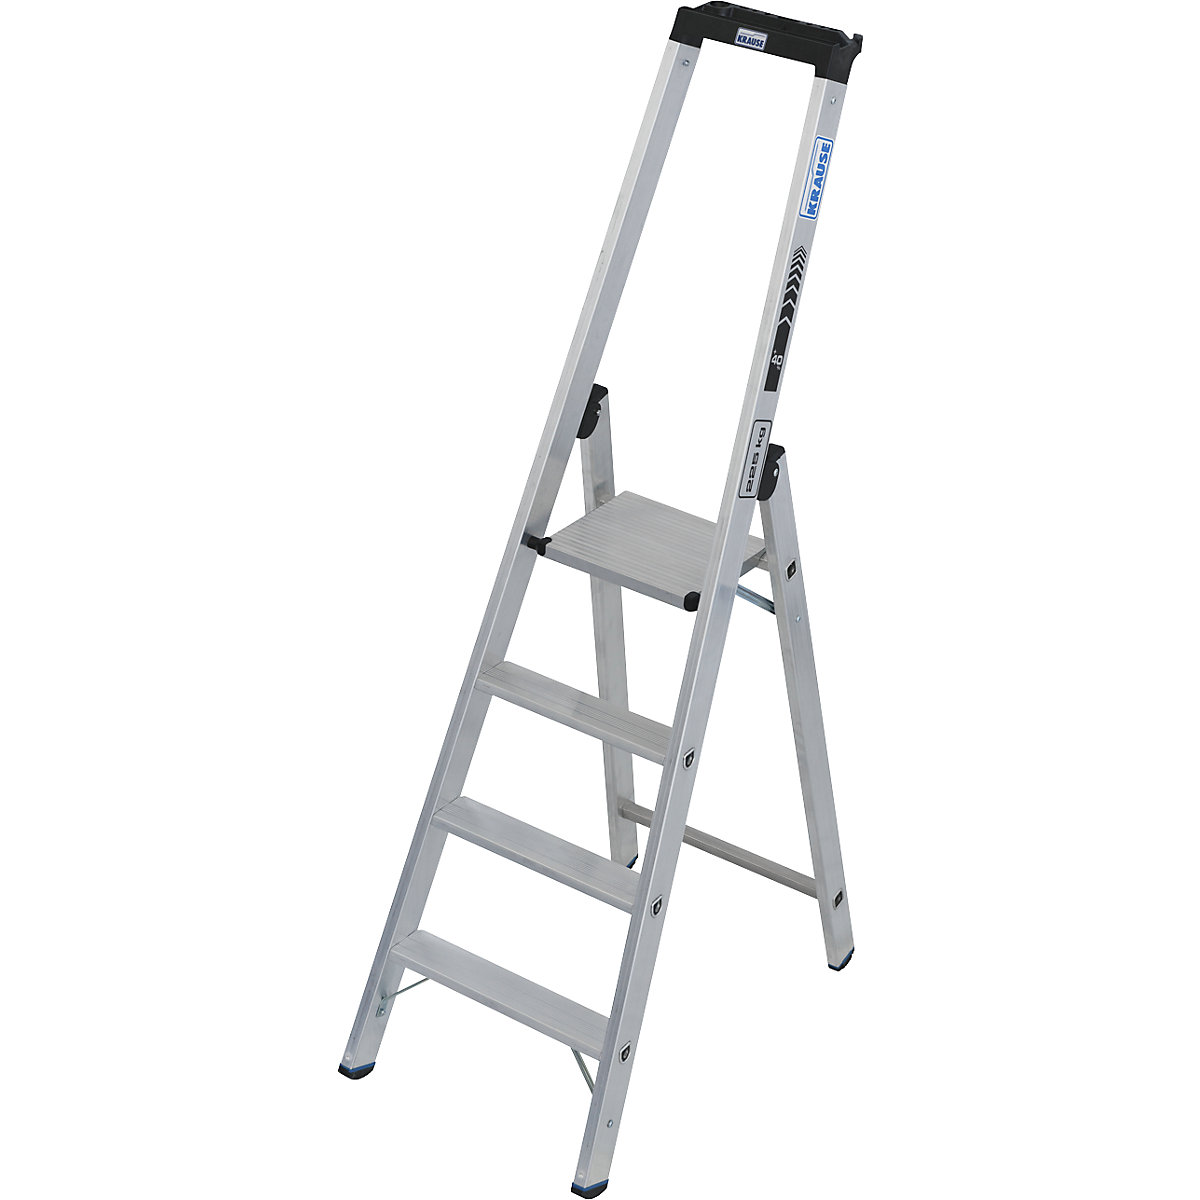 Heavy duty step ladder – KRAUSE, single sided access, up to 225 kg, 4 steps incl. platform-2